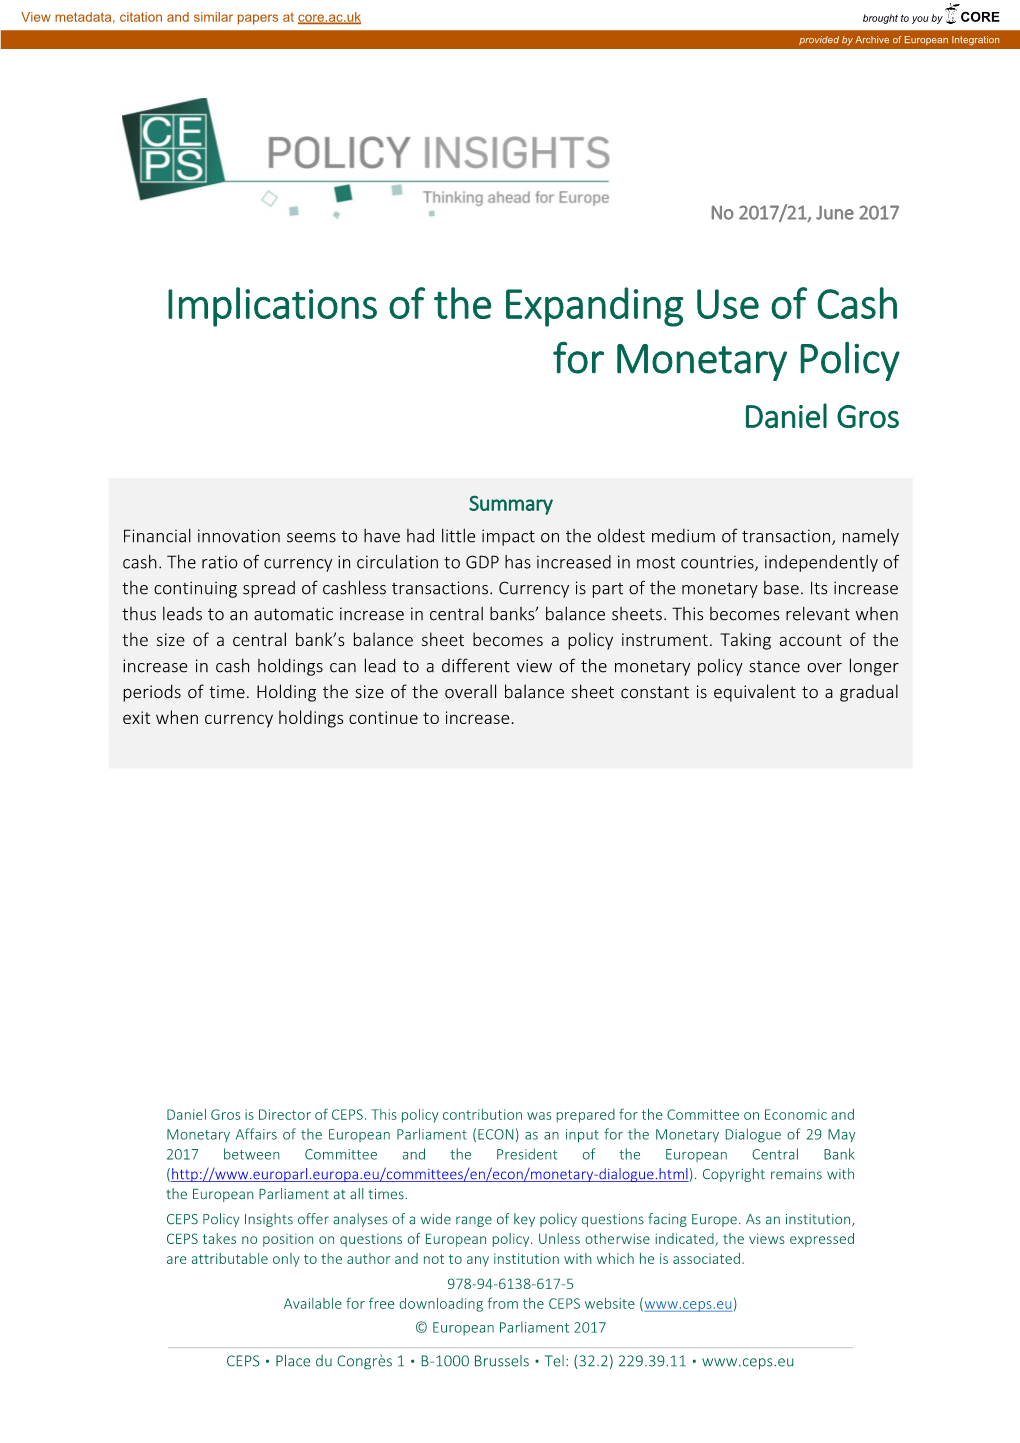 Implications of the Expanding Use of Cash for Monetary Policy Daniel Gros